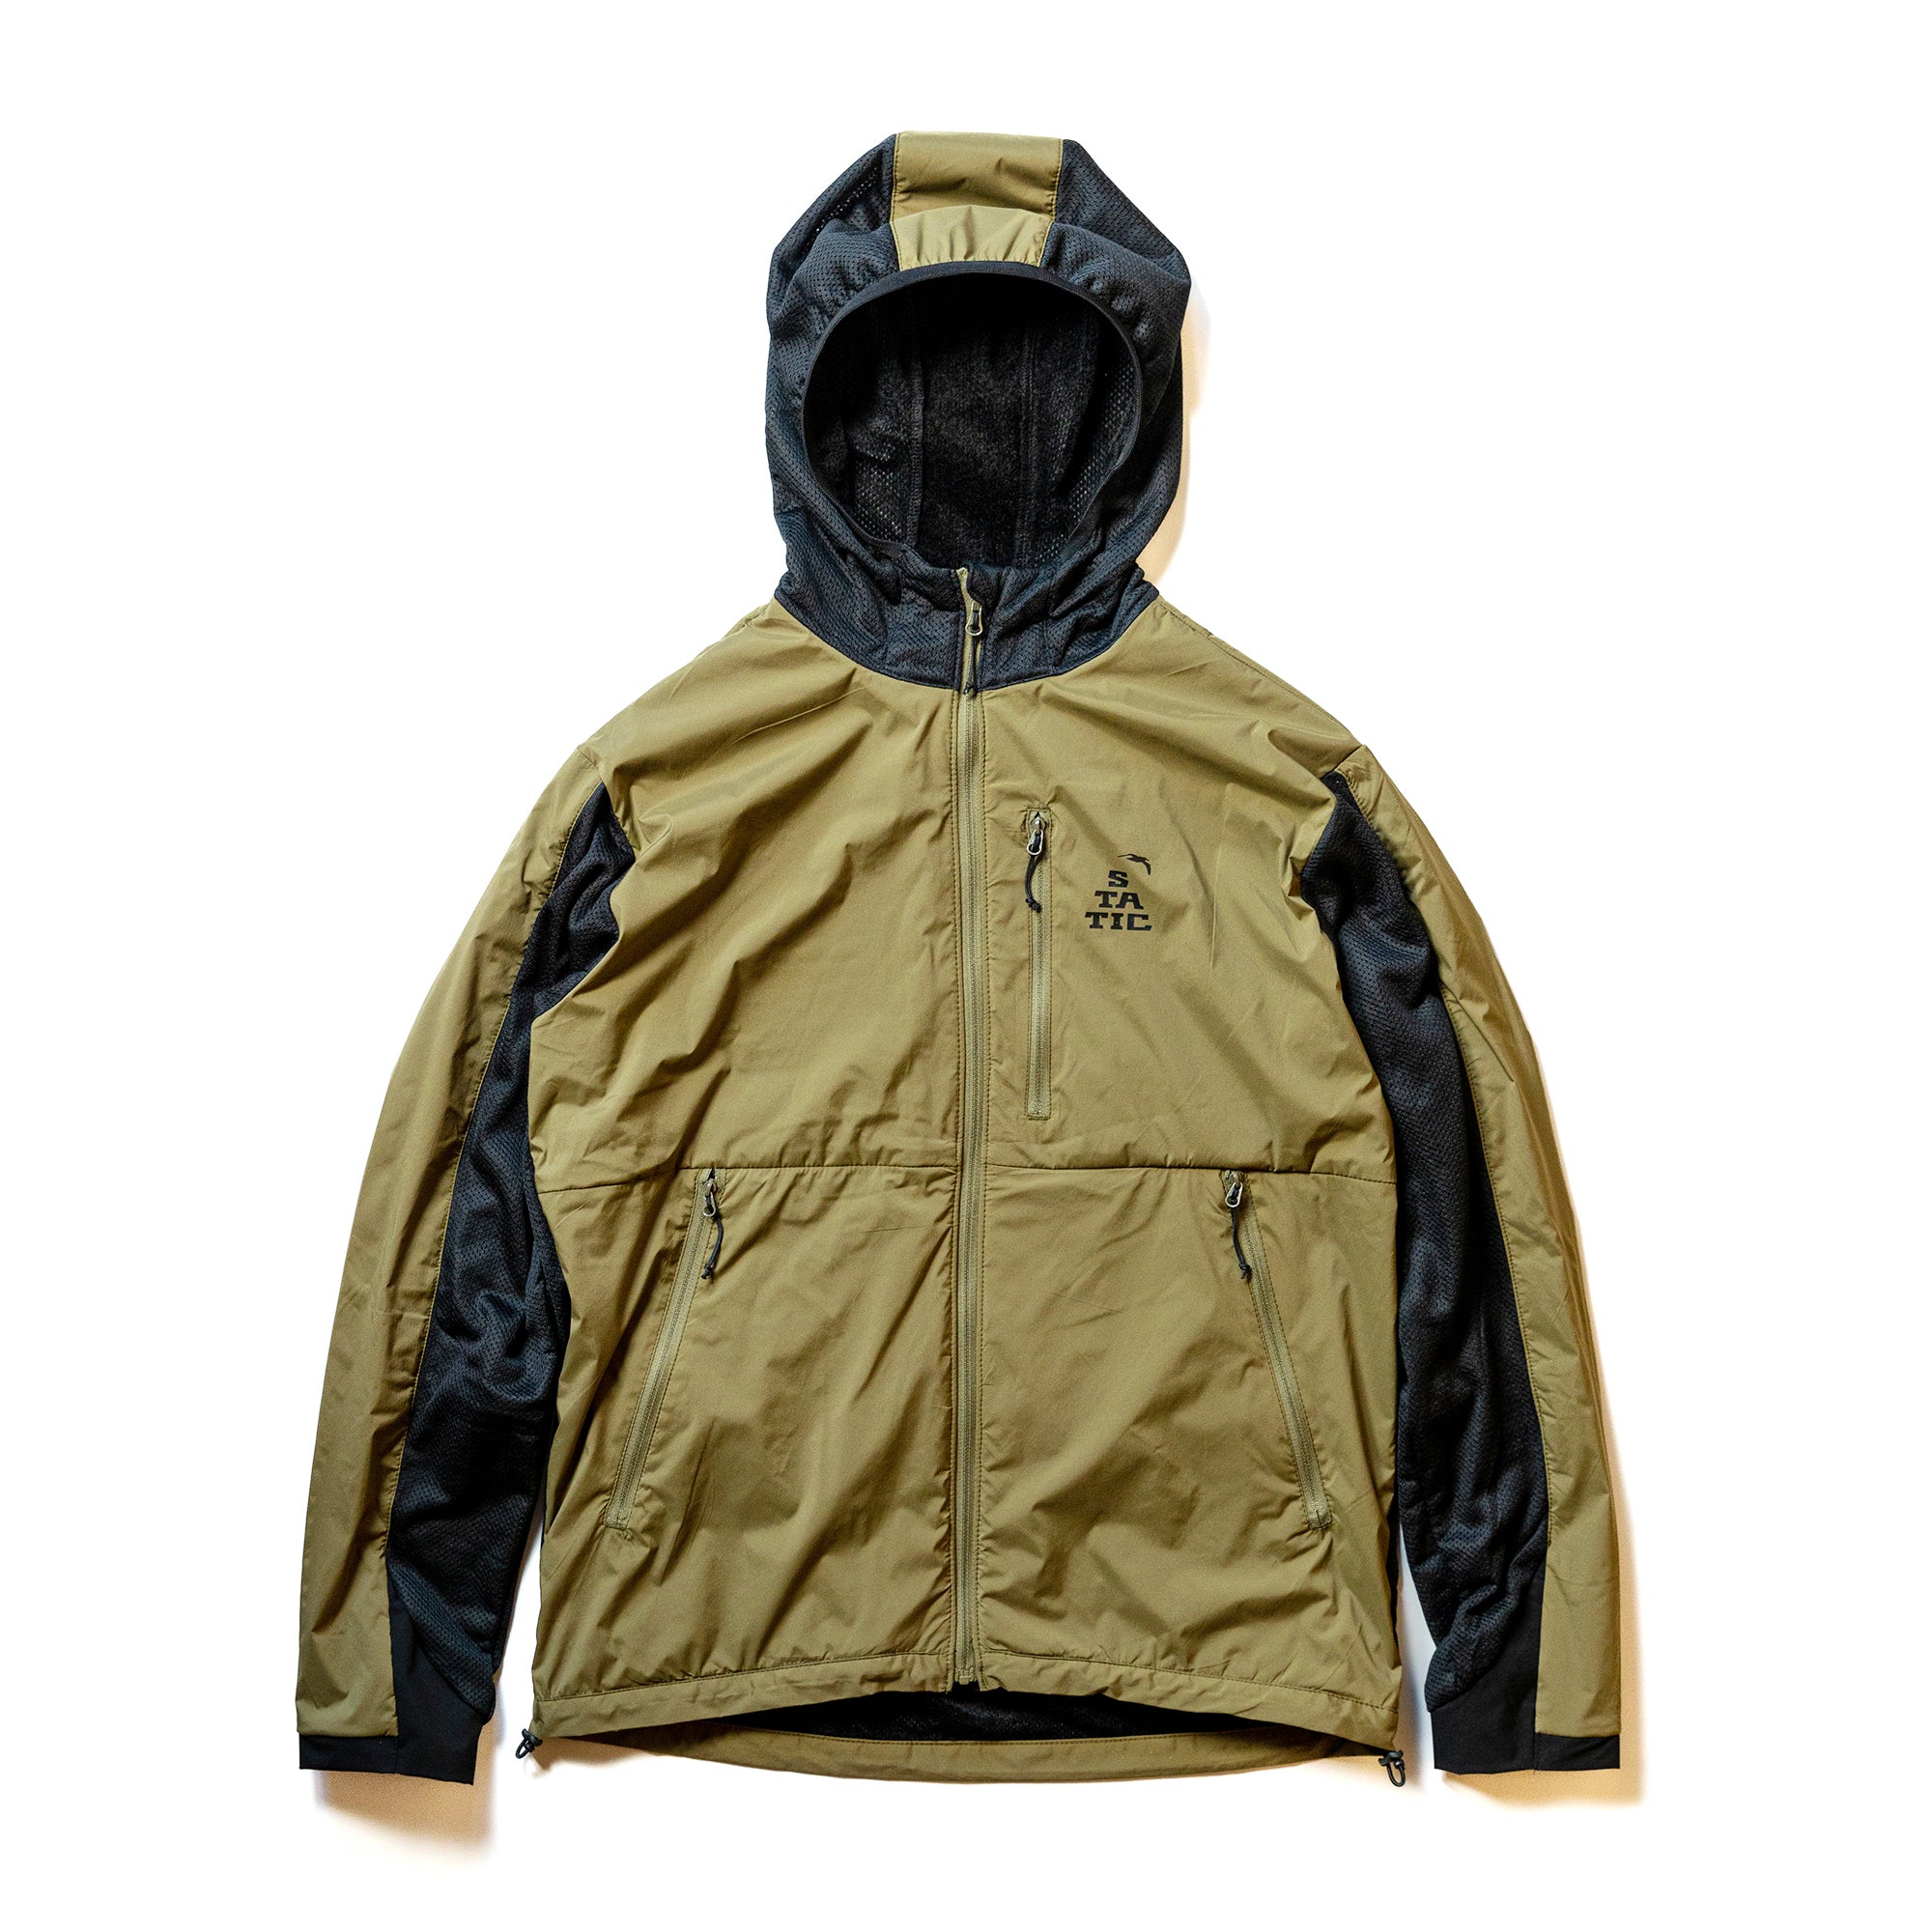 ADRIFT HOODY WITH SHELL